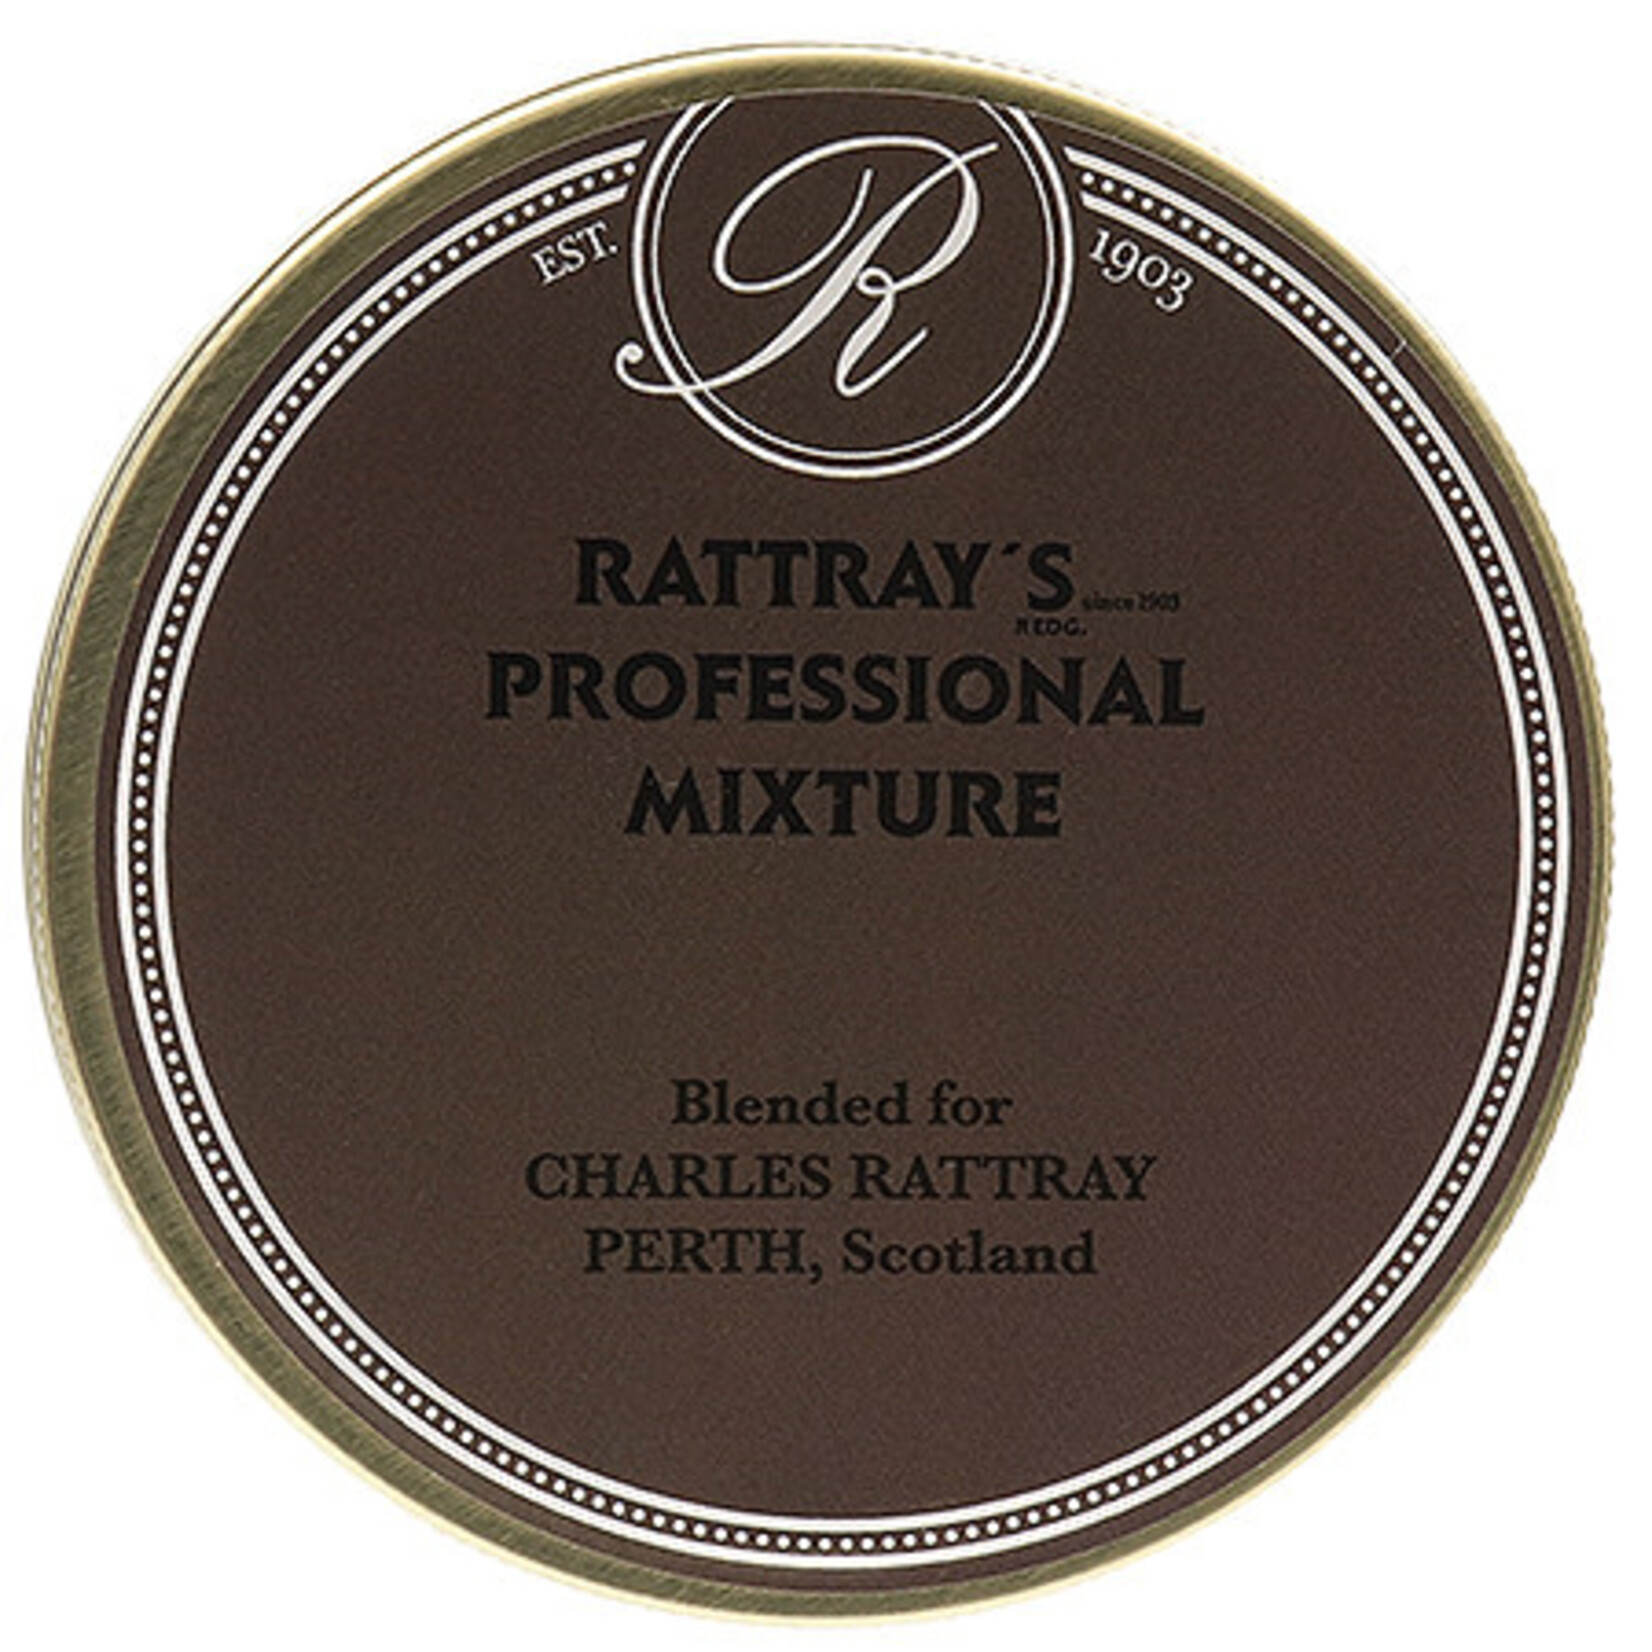 RATTRAY'S RATTRAY'S PROFESSIONAL MIXTURE